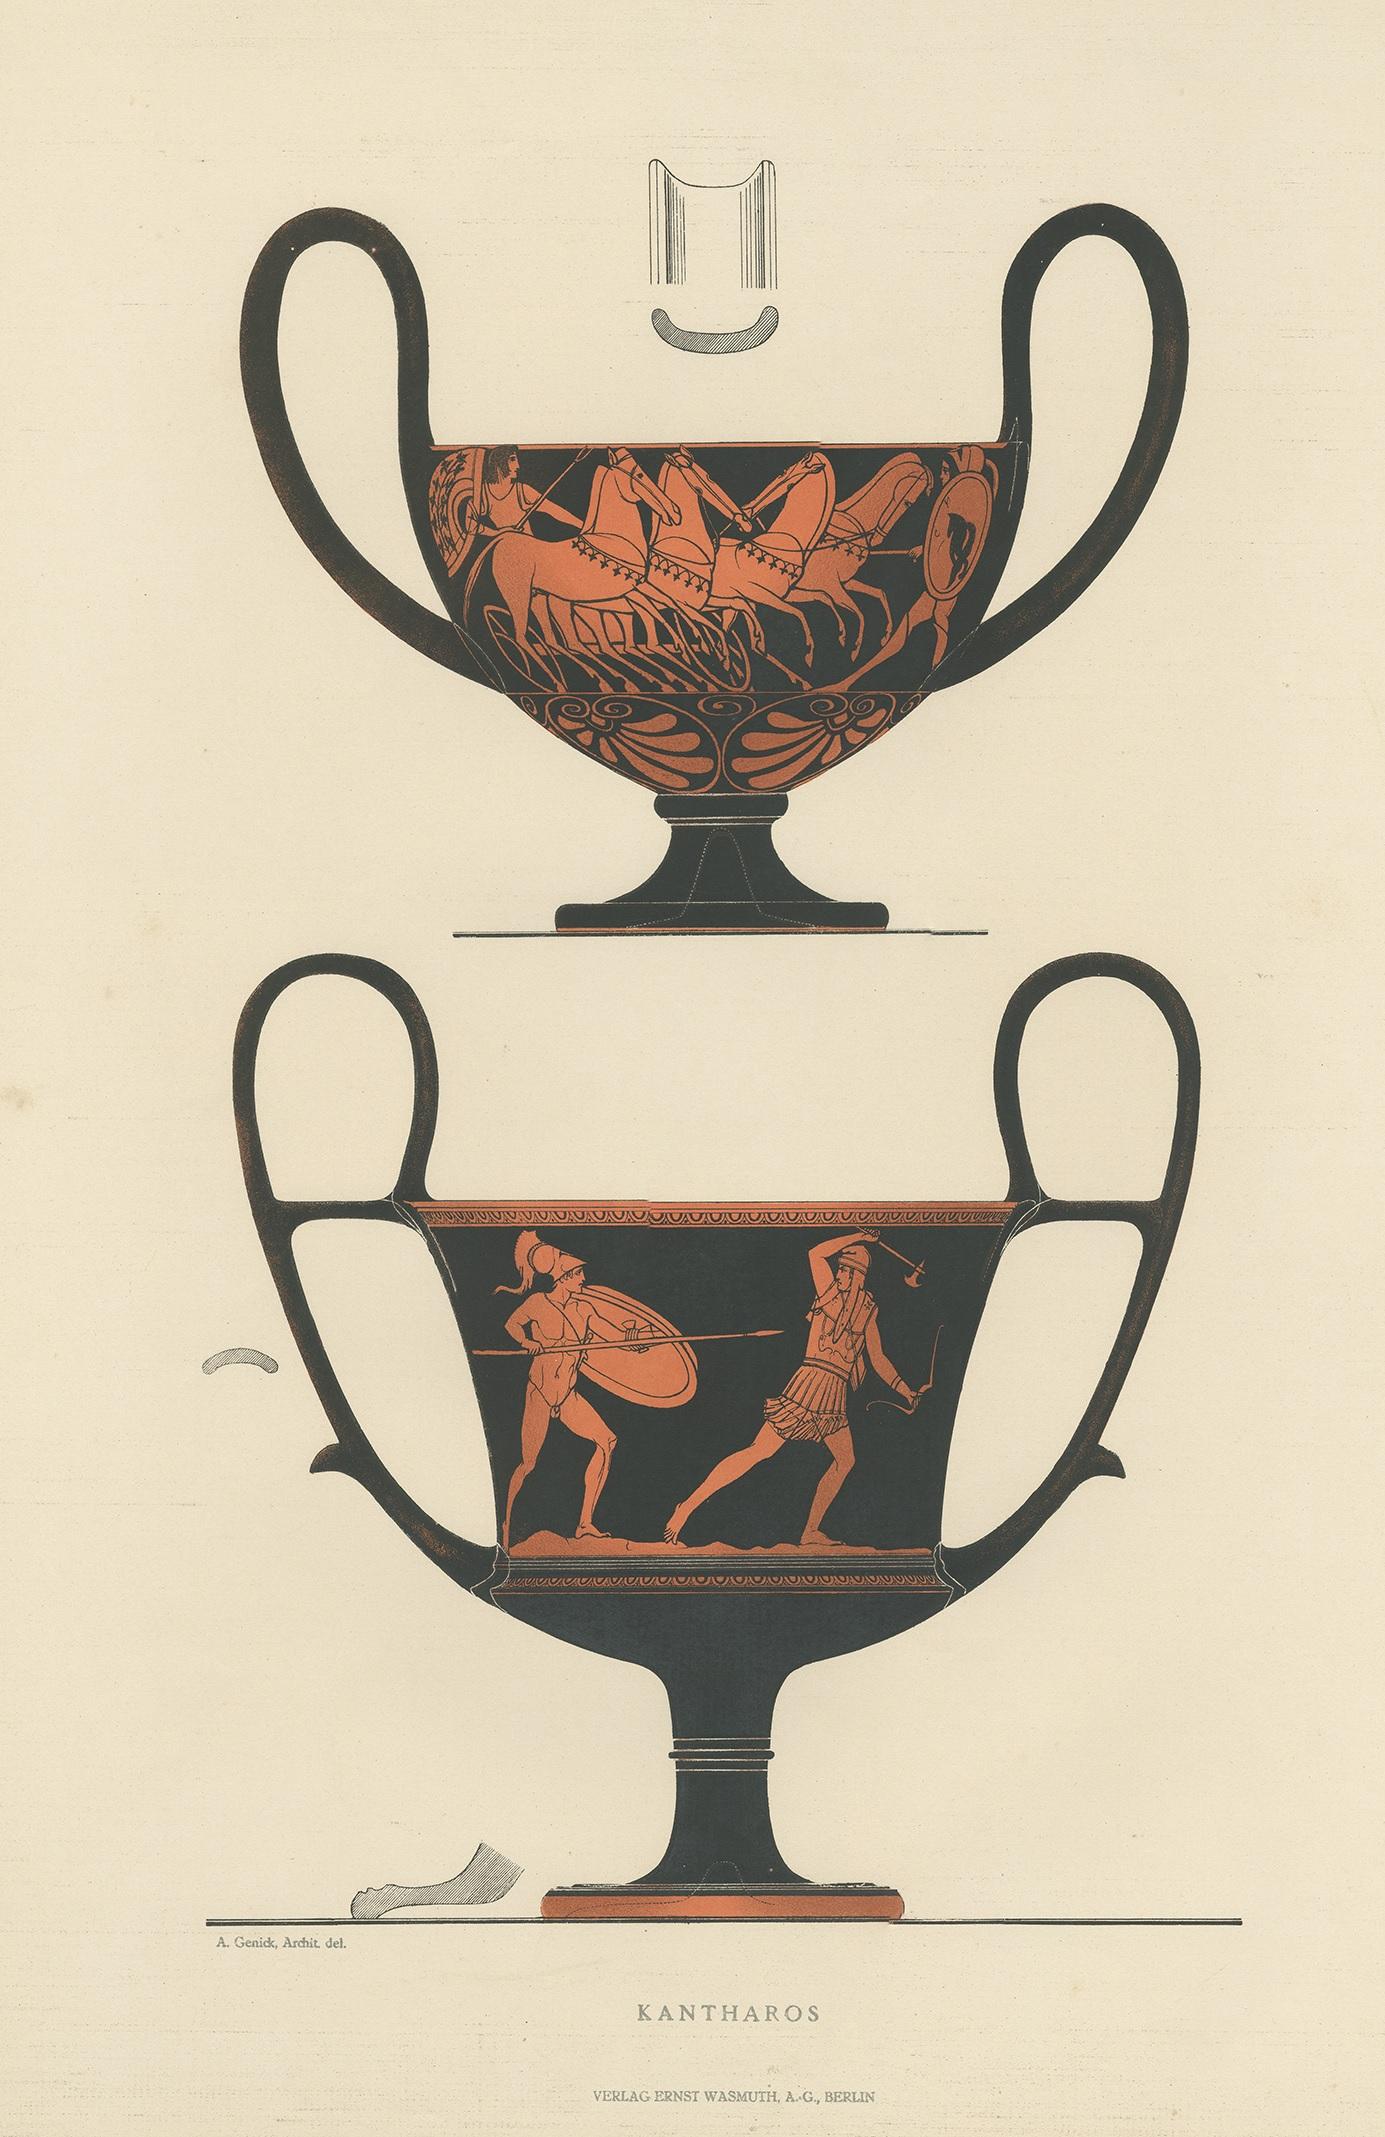 Antique print titled 'Kantharos'. Color-printed large lithograph by Ernst Wasmuth depicting Greek kantharos. A kantharos or cantharus, a type of ancient Greek cup used for drinking. This print originates from 'Griechische Keramik' by A. Genick.